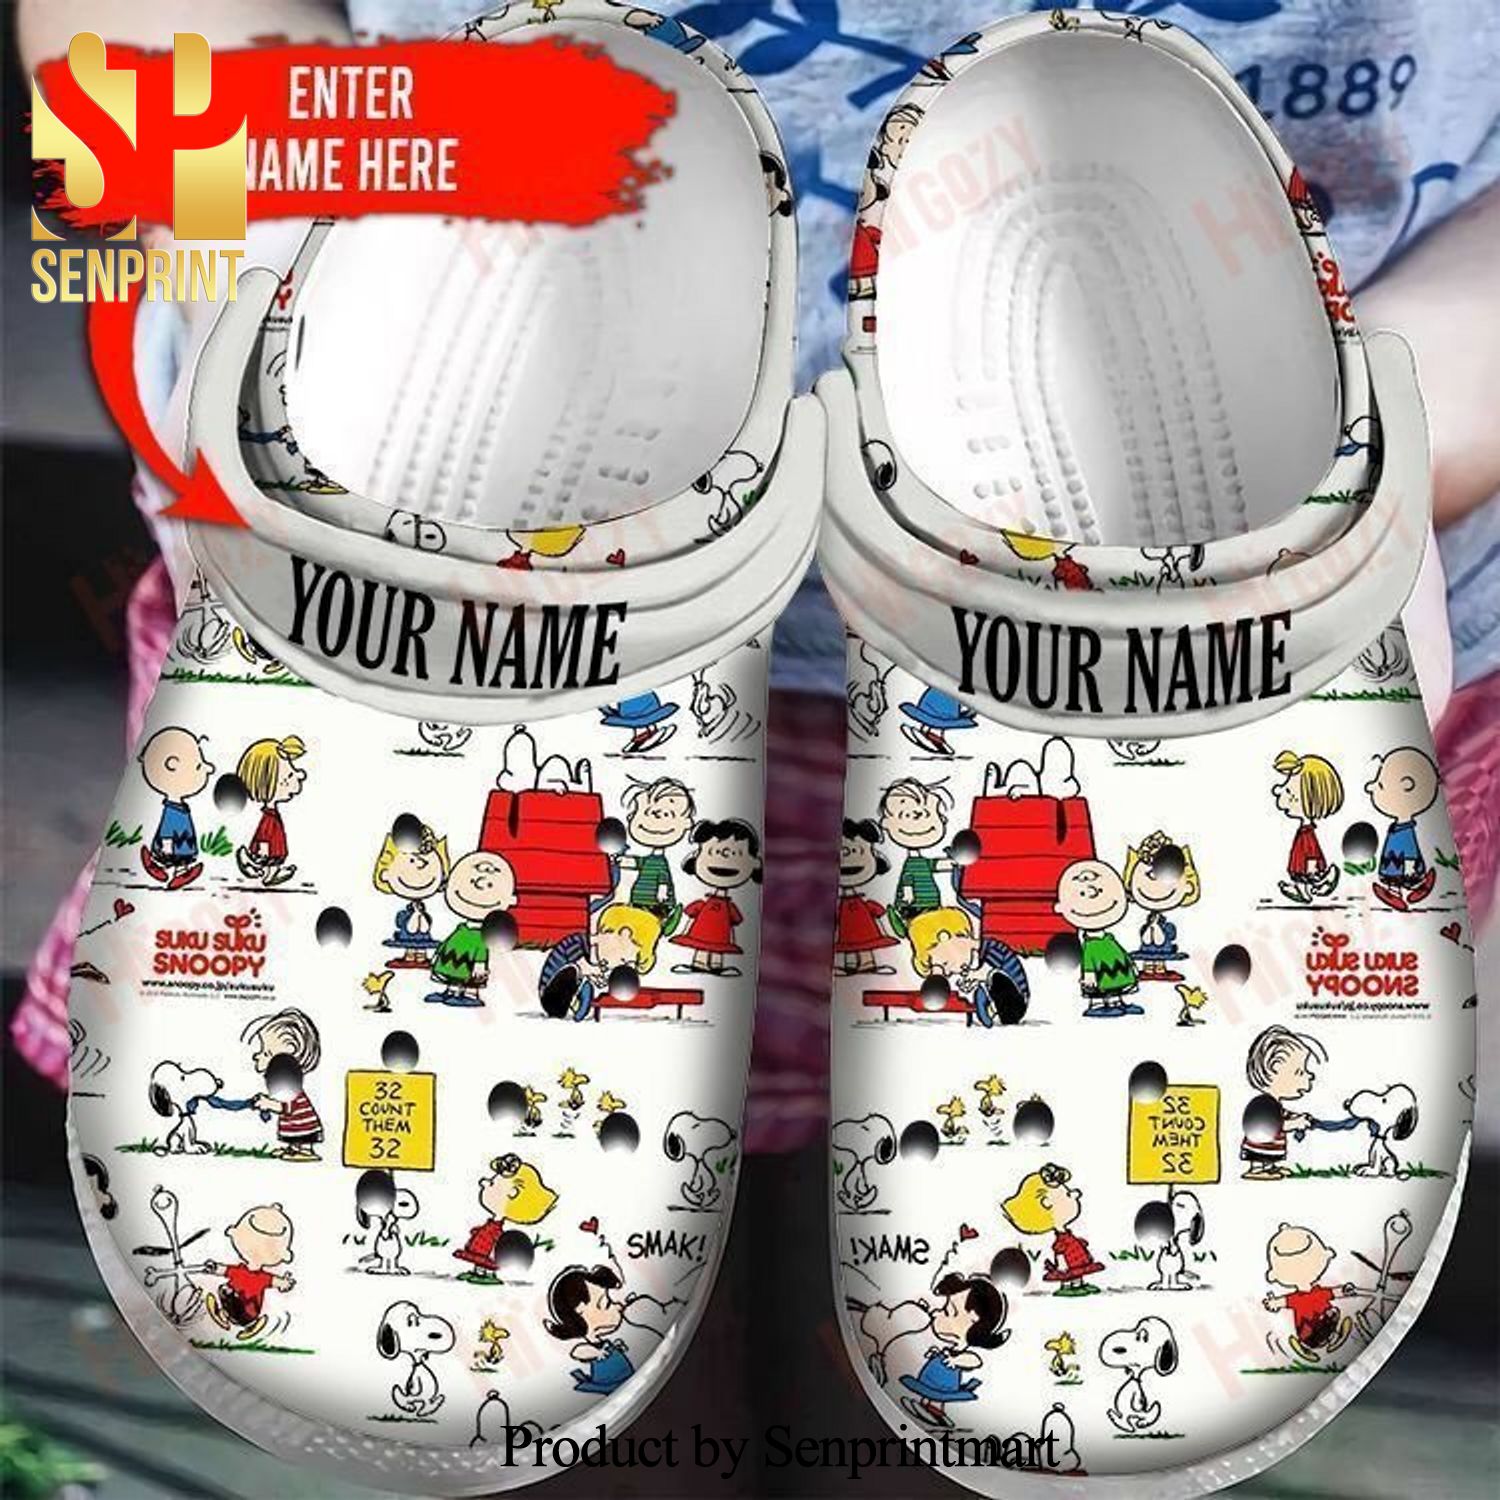 Woodstock Snoopy Gift For Fan Classic Water All Over Printed Crocs Crocband Adult Clogs